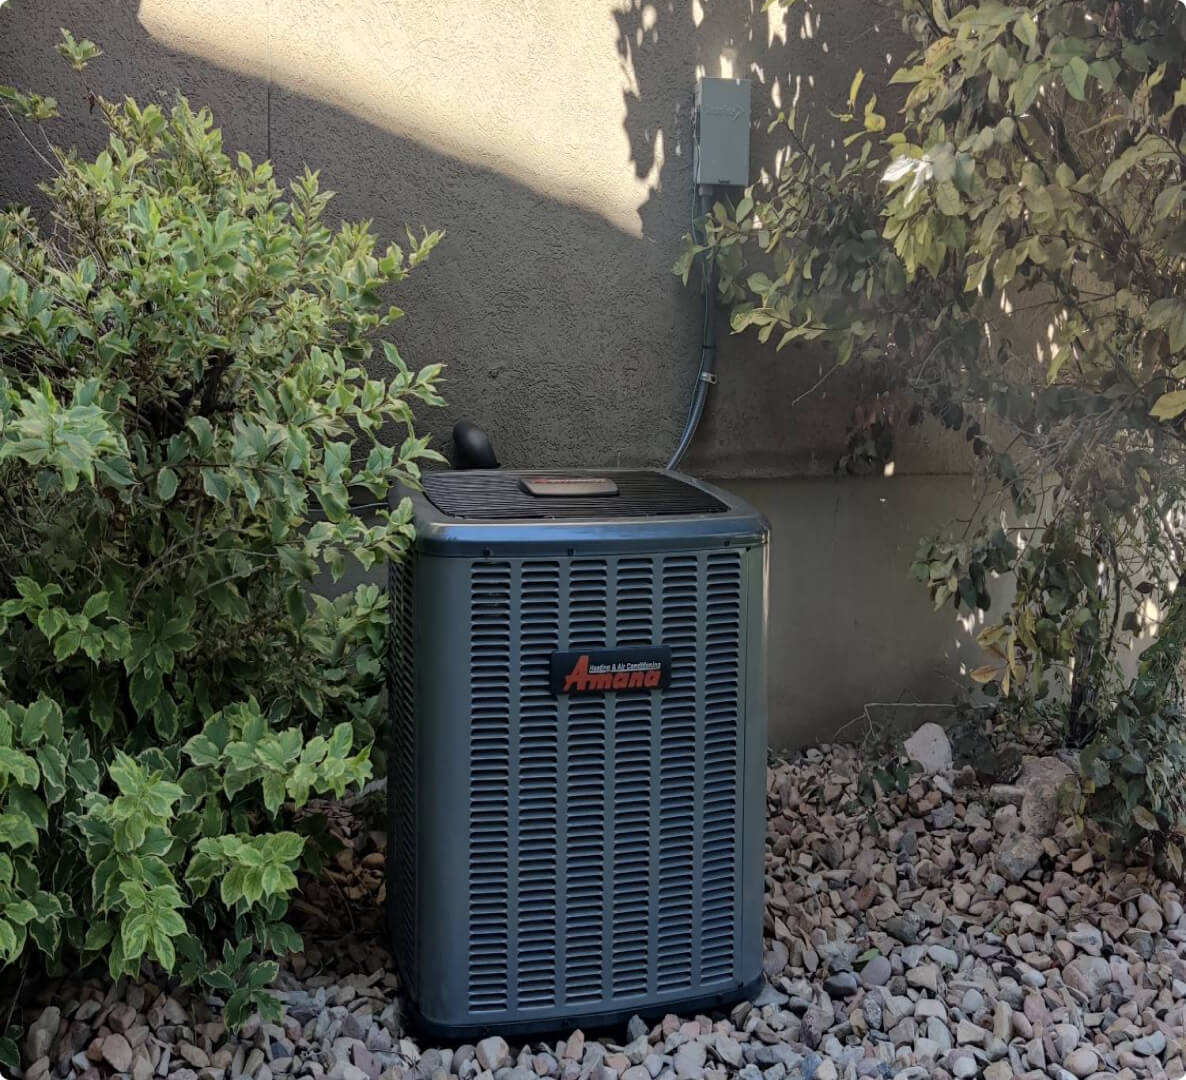 Amana air conditioning unit outside a house.